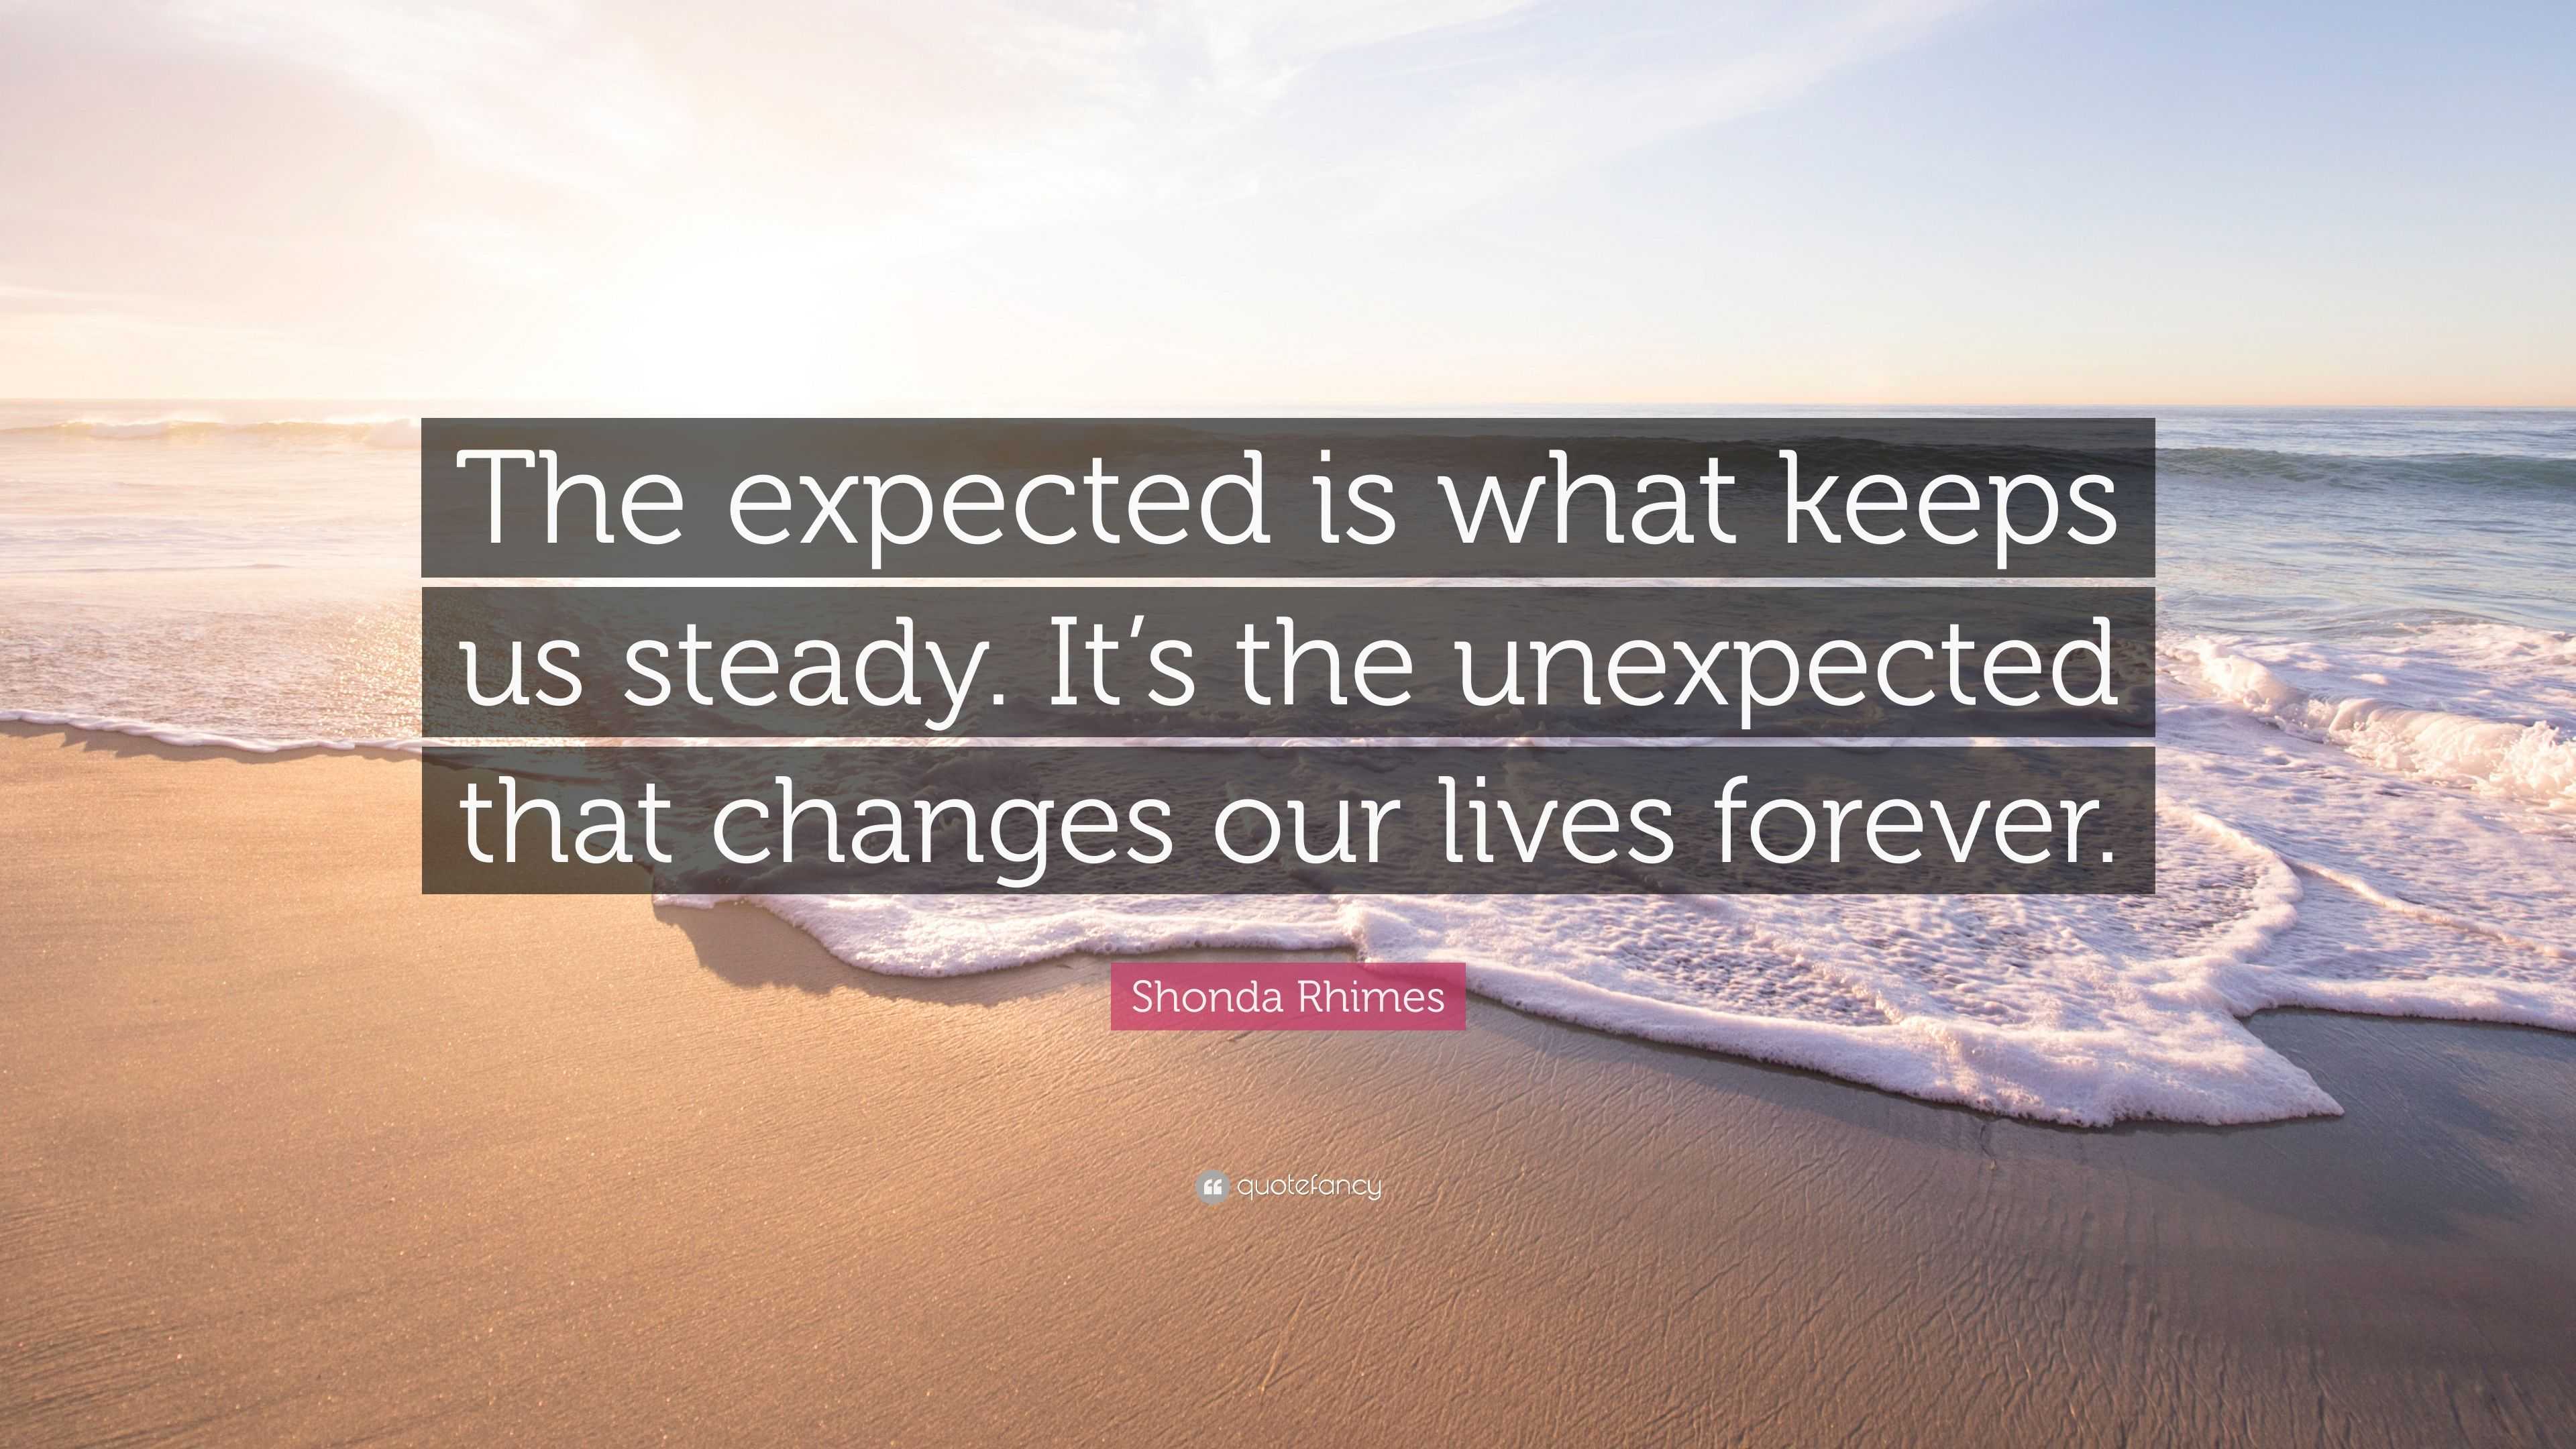 Shonda Rhimes Quote: “The expected is what keeps us steady. It's ...